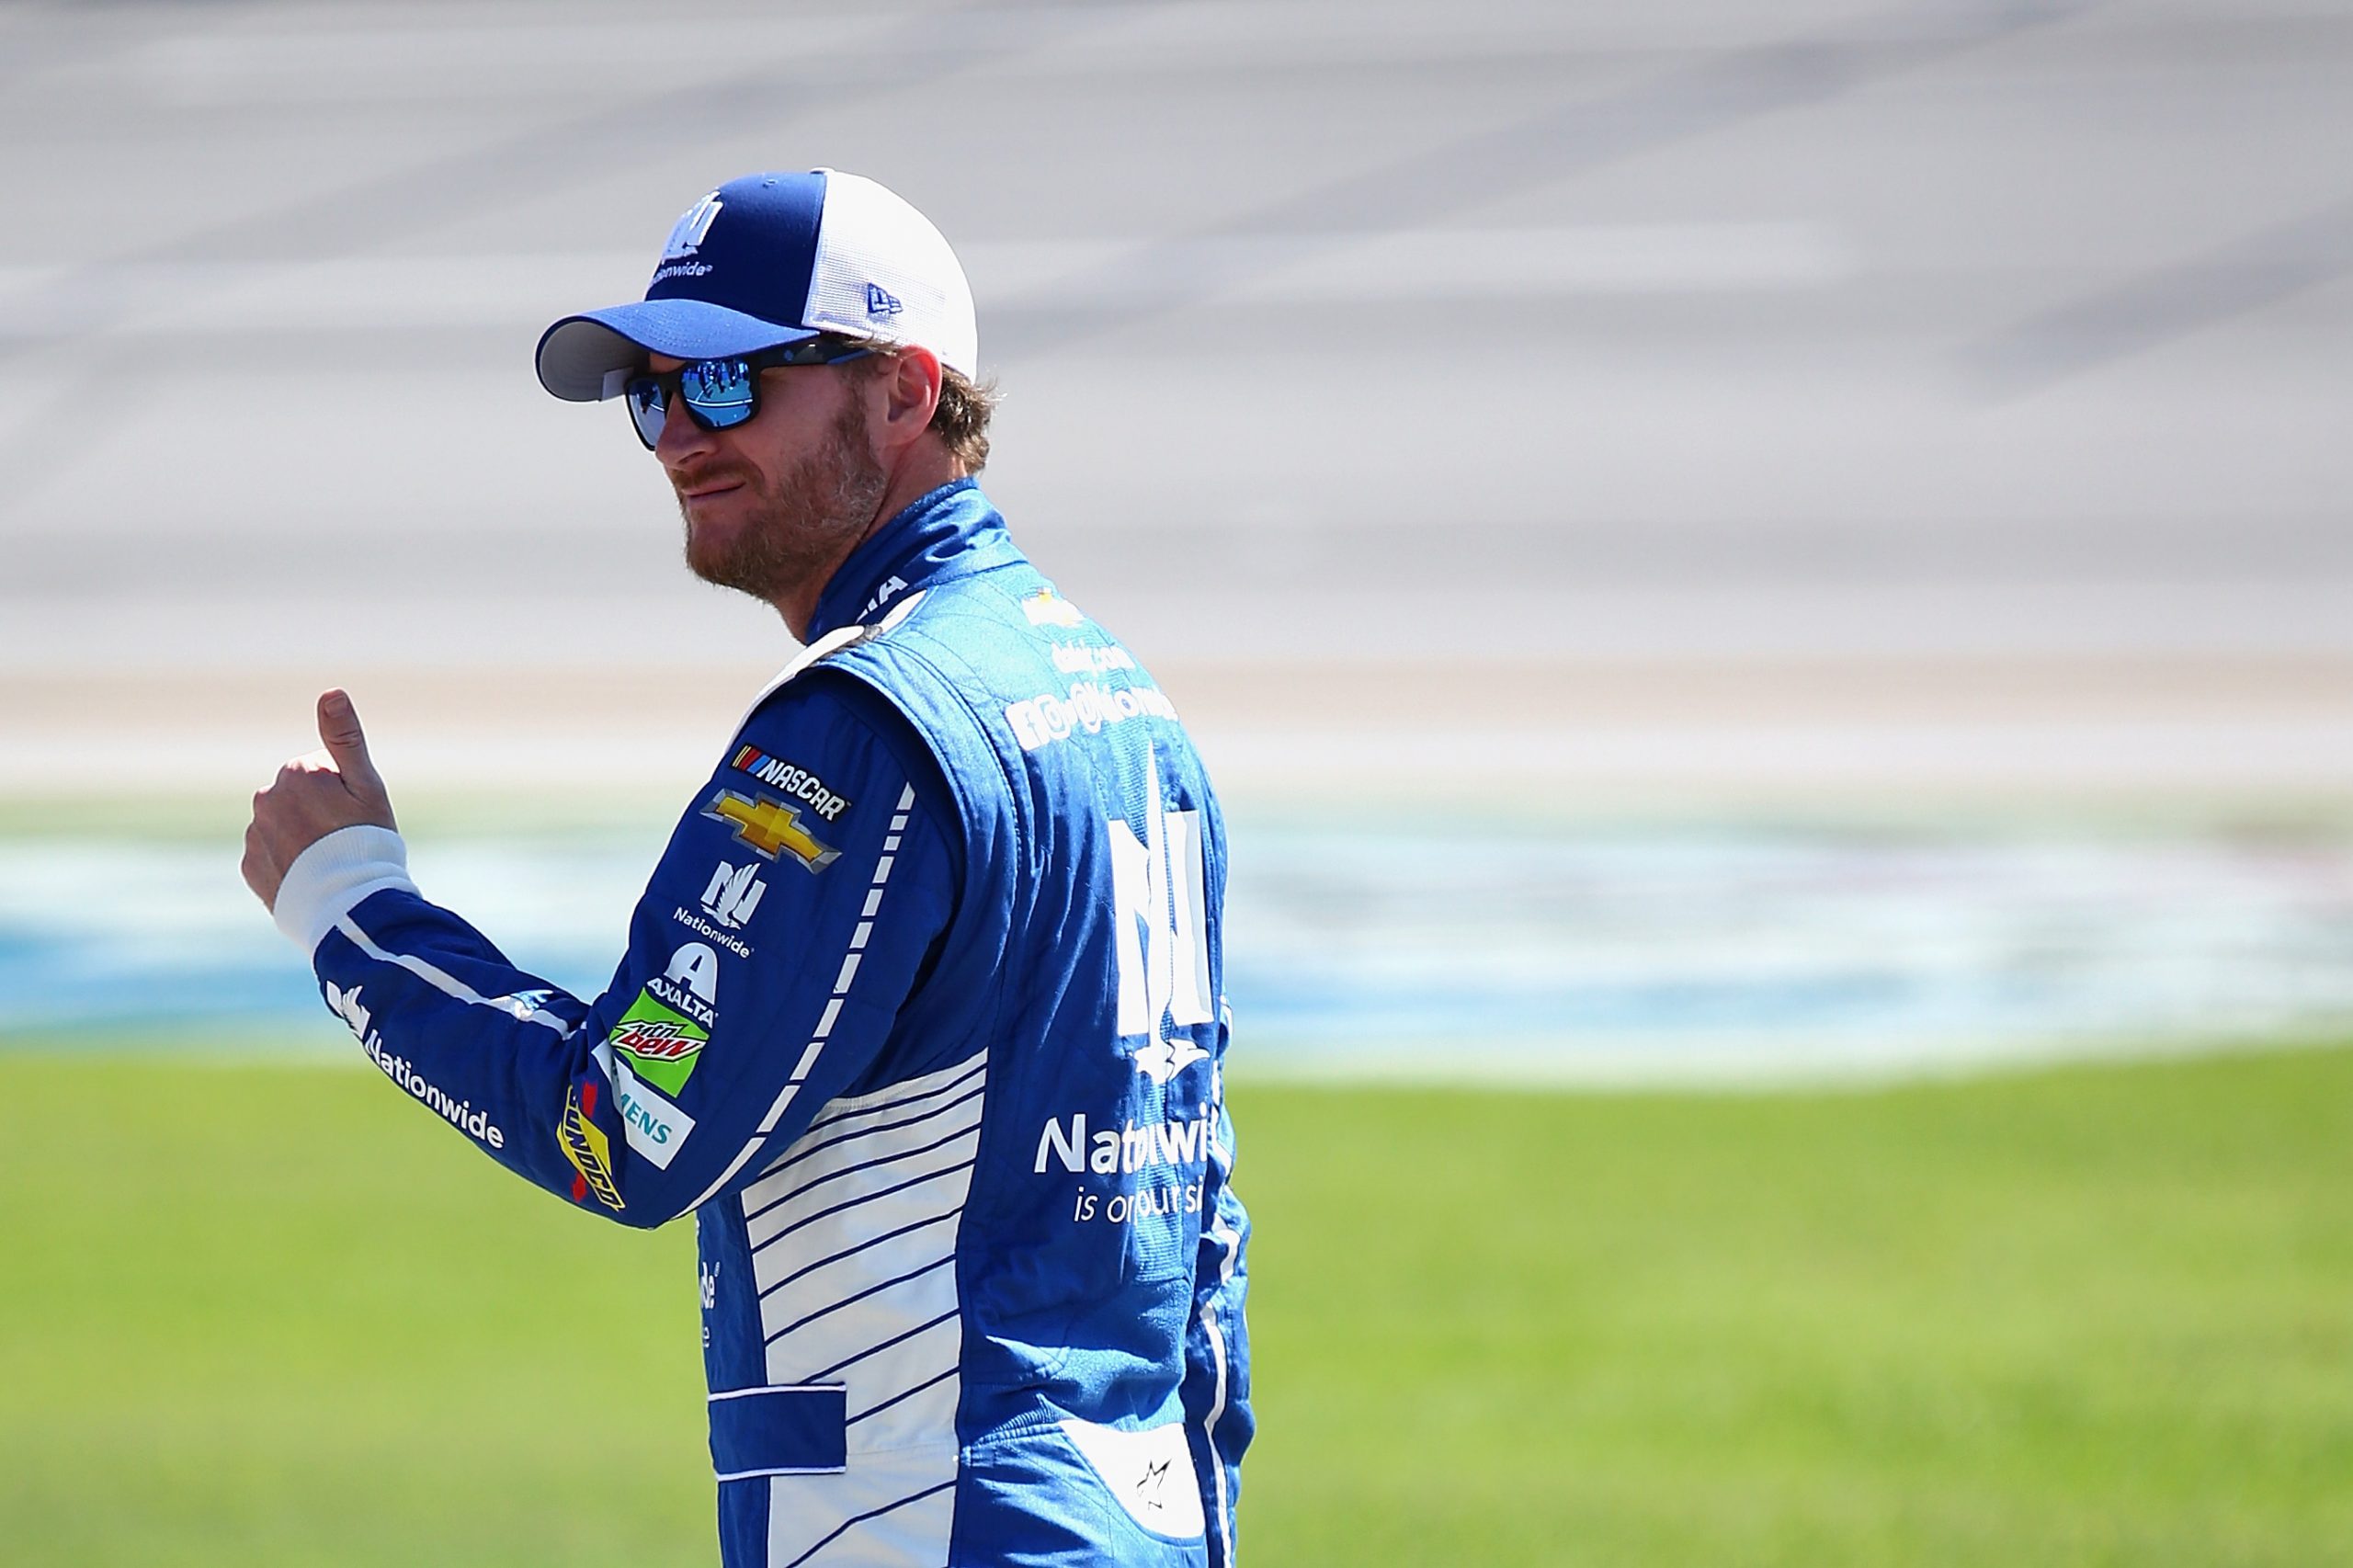 Dale Earnhardt Jr. gives the thumbs-up sign in 2017.